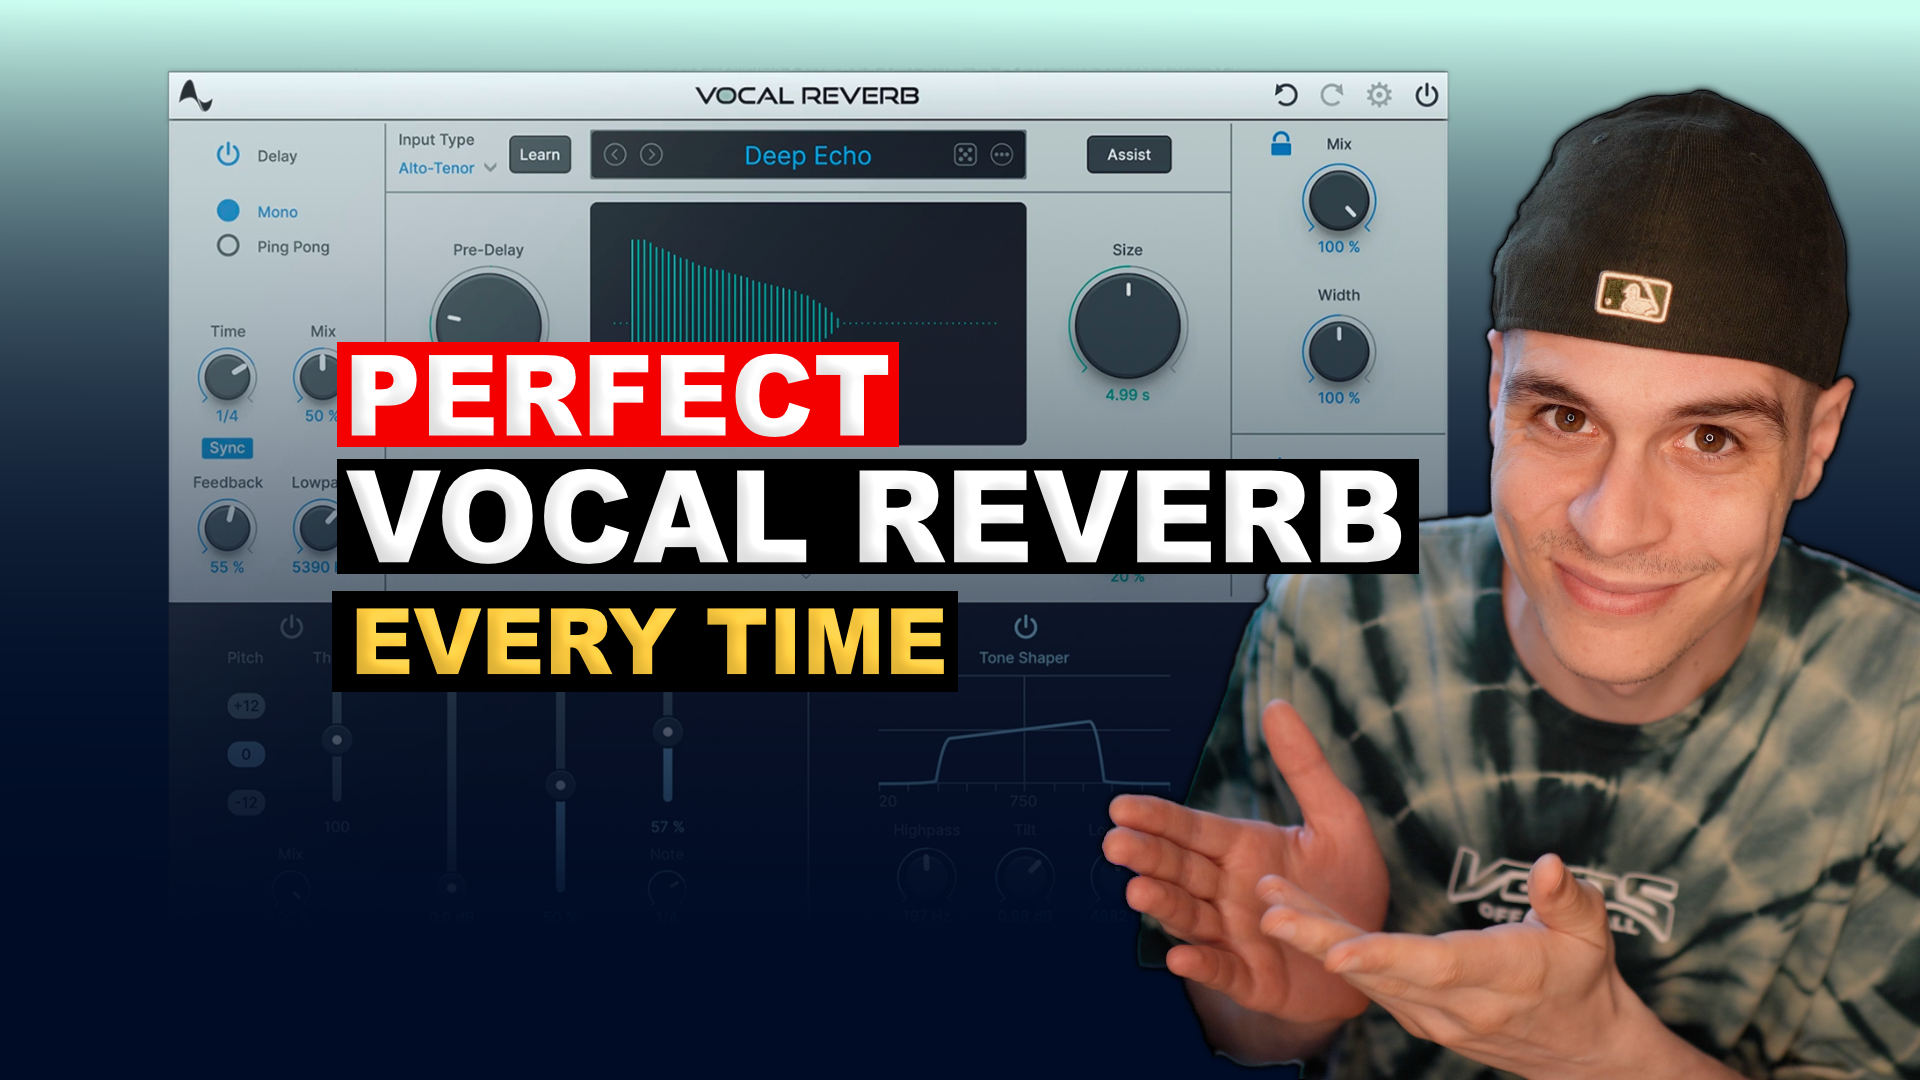 vocal reverb , Dxt3r, Auto-tune Vocal reverb, Perfect reverb with Dxt3r